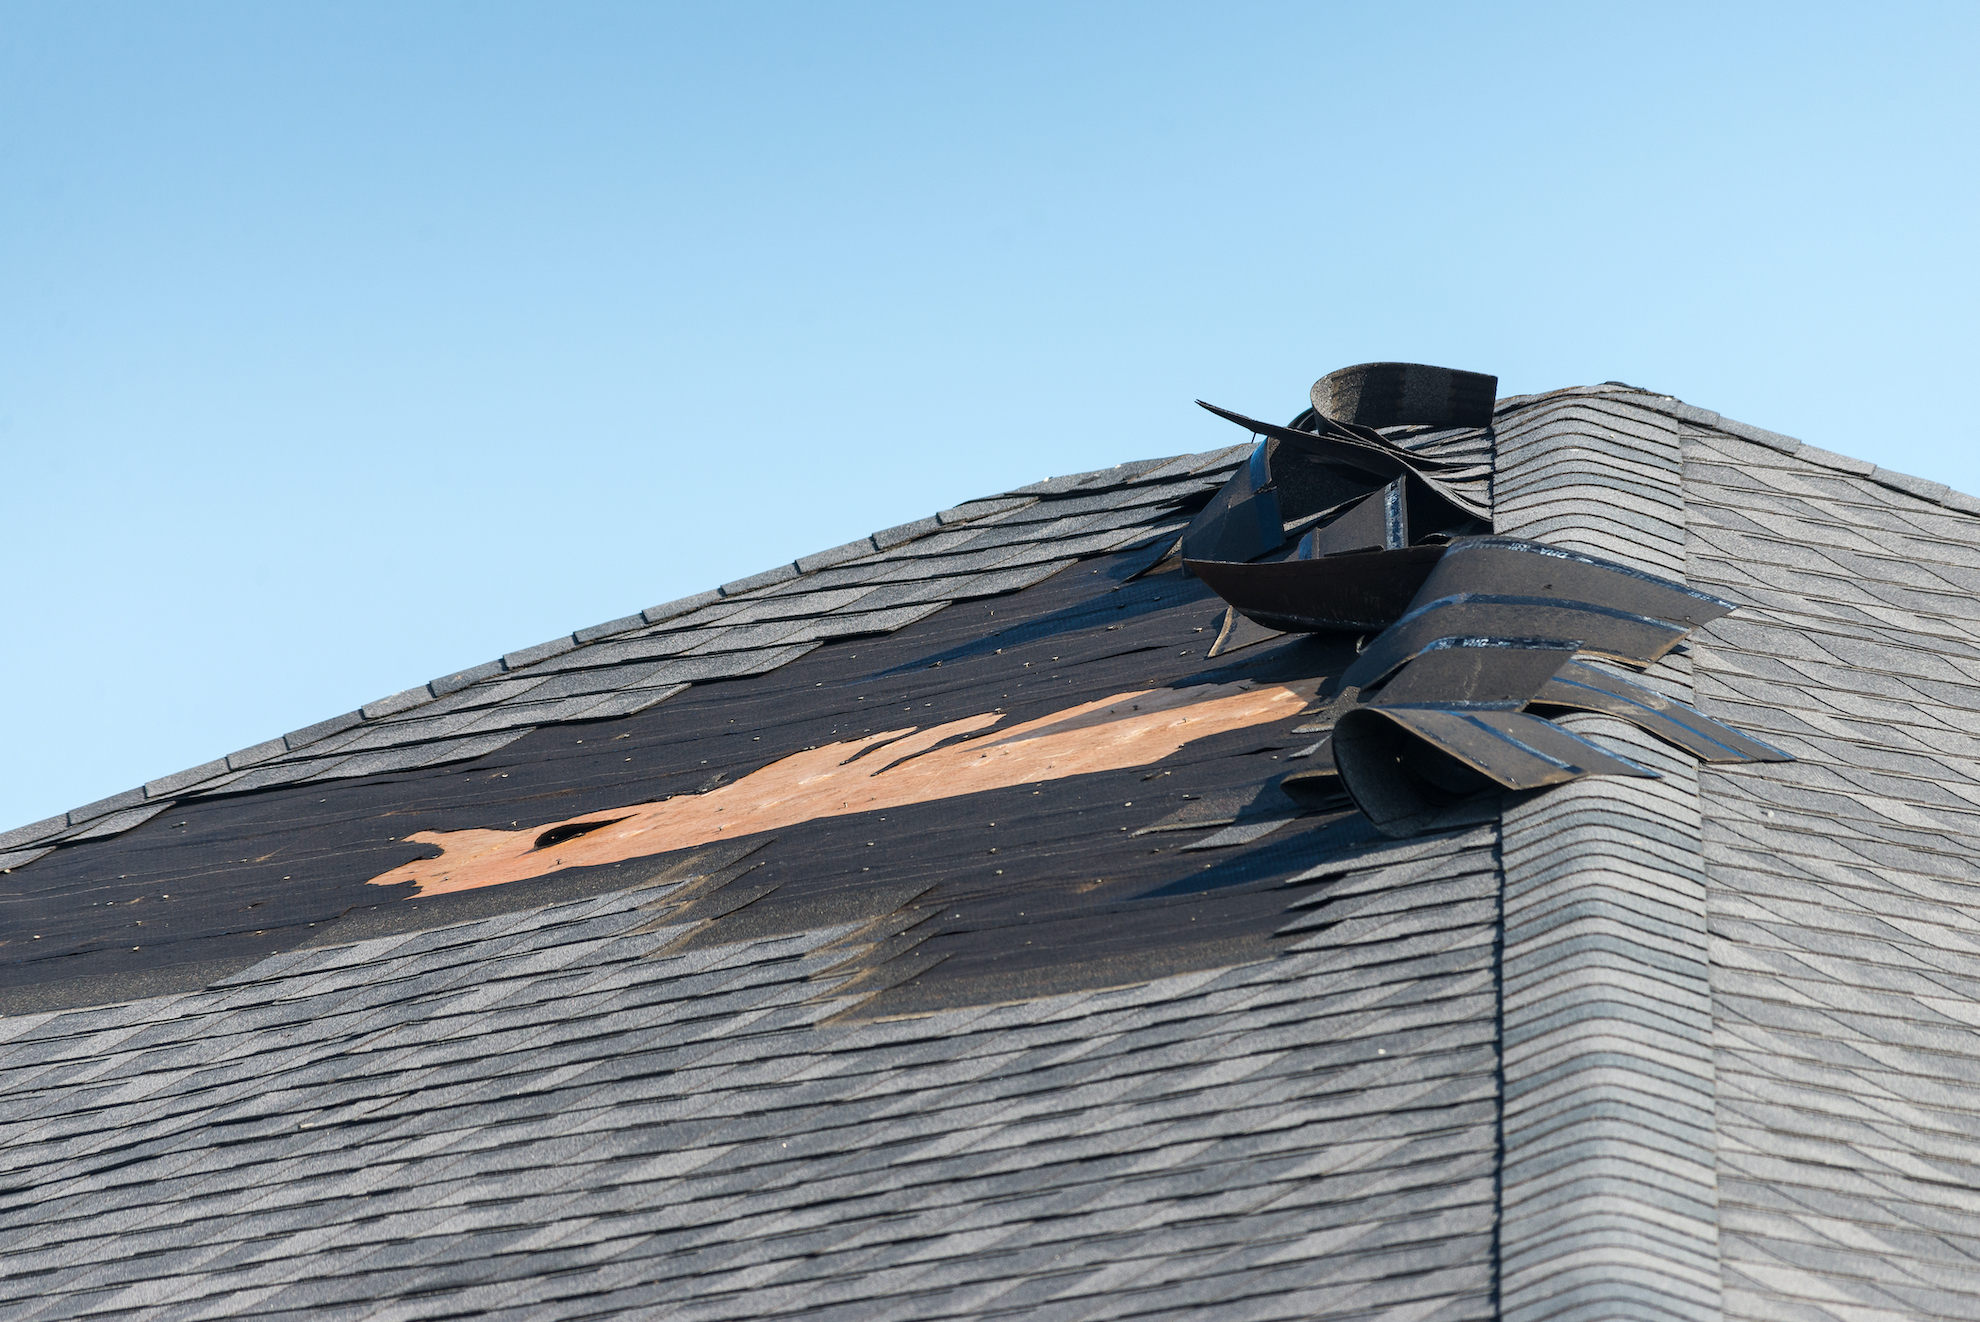 Image of a roof that has had shingles blown off due to wind damage